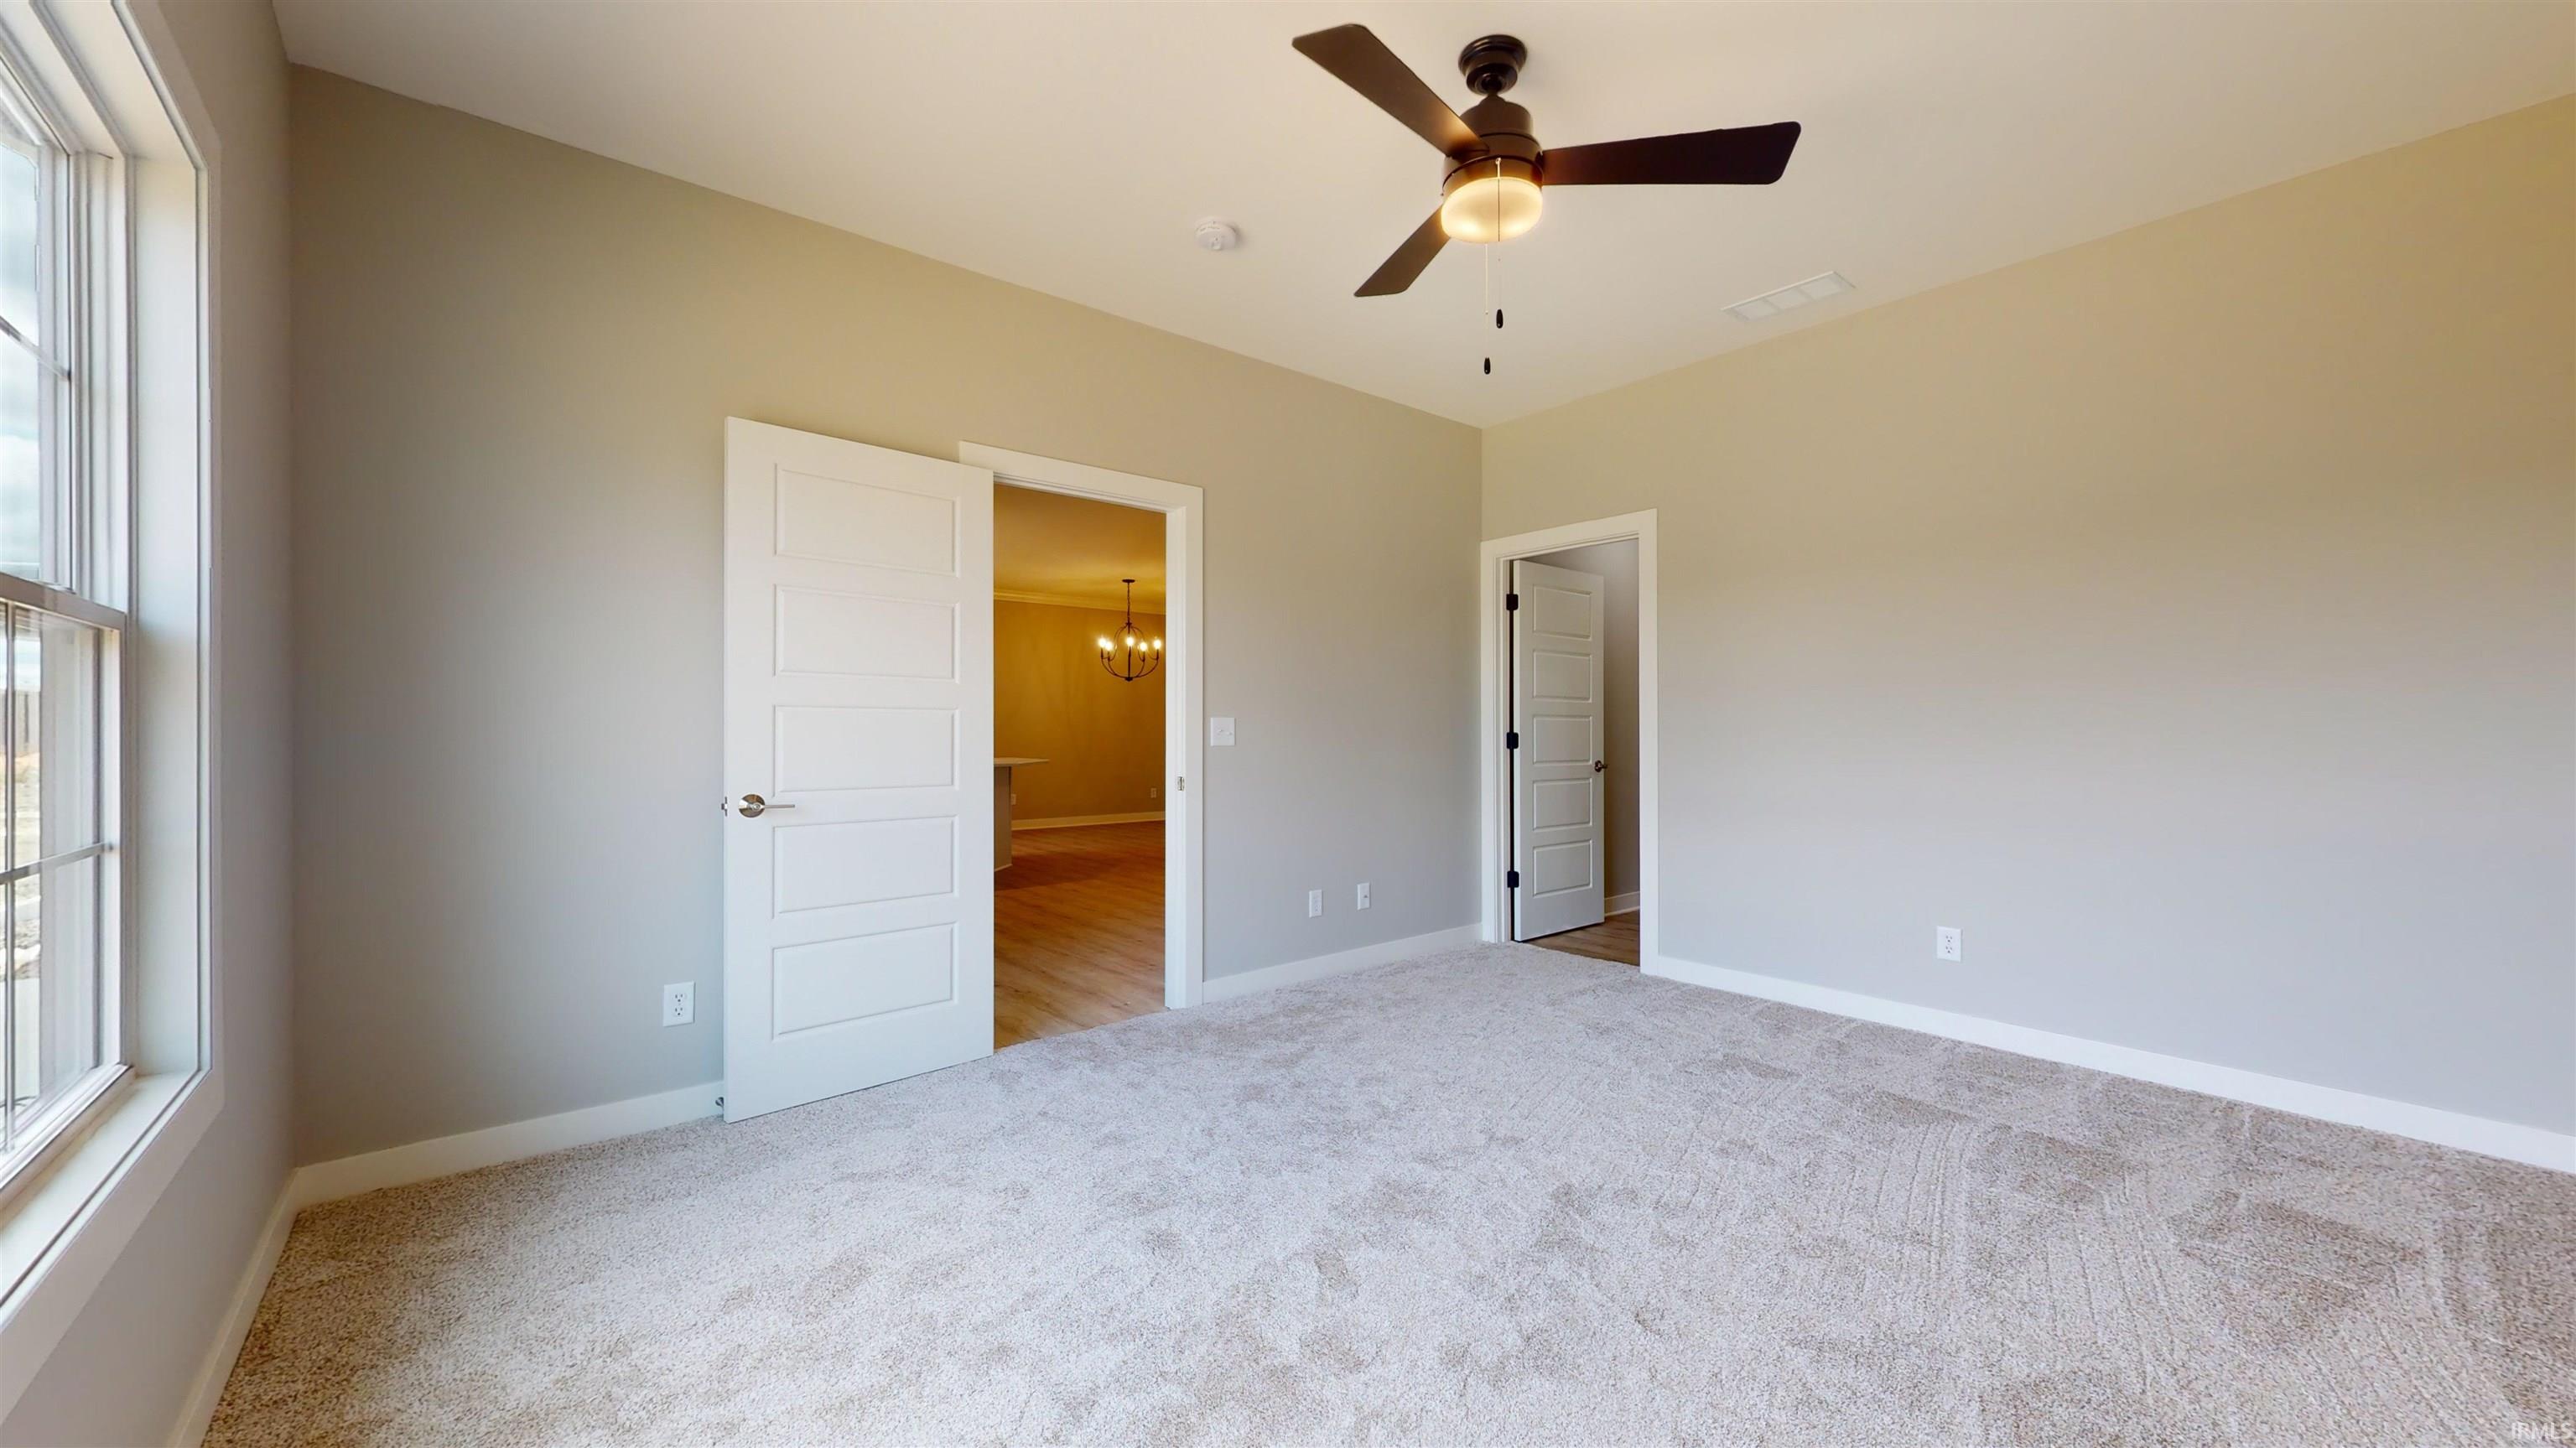 The laundry closet & pantry closet are located in the hallway between the garage and the kitchen/dining.